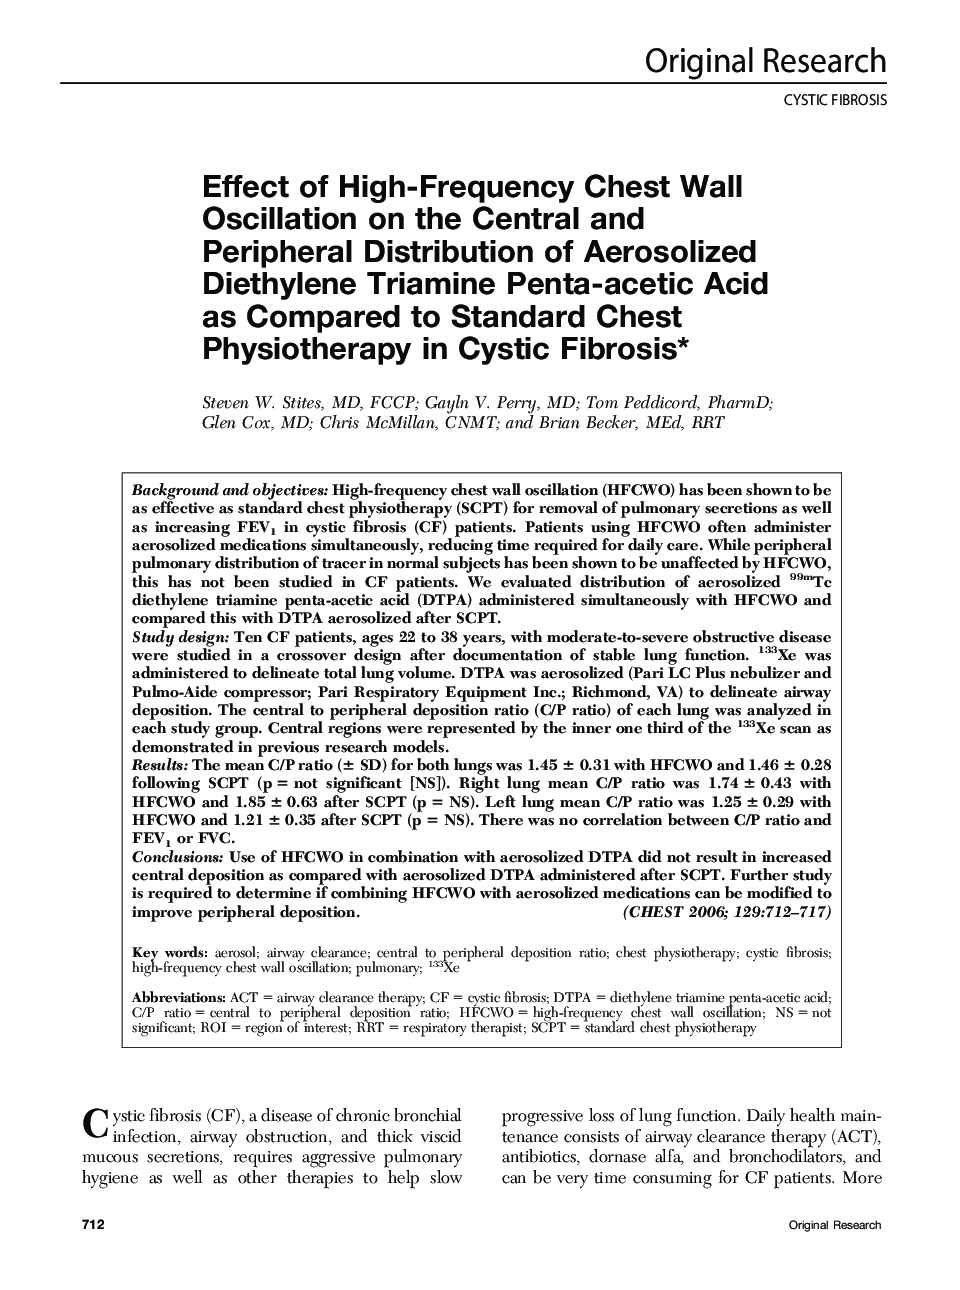 Effect of High-Frequency Chest Wall Oscillation on the Central and Peripheral Distribution of Aerosolized Diethylene Triamine Penta-acetic Acid as Compared to Standard Chest Physiotherapy in Cystic Fibrosis 